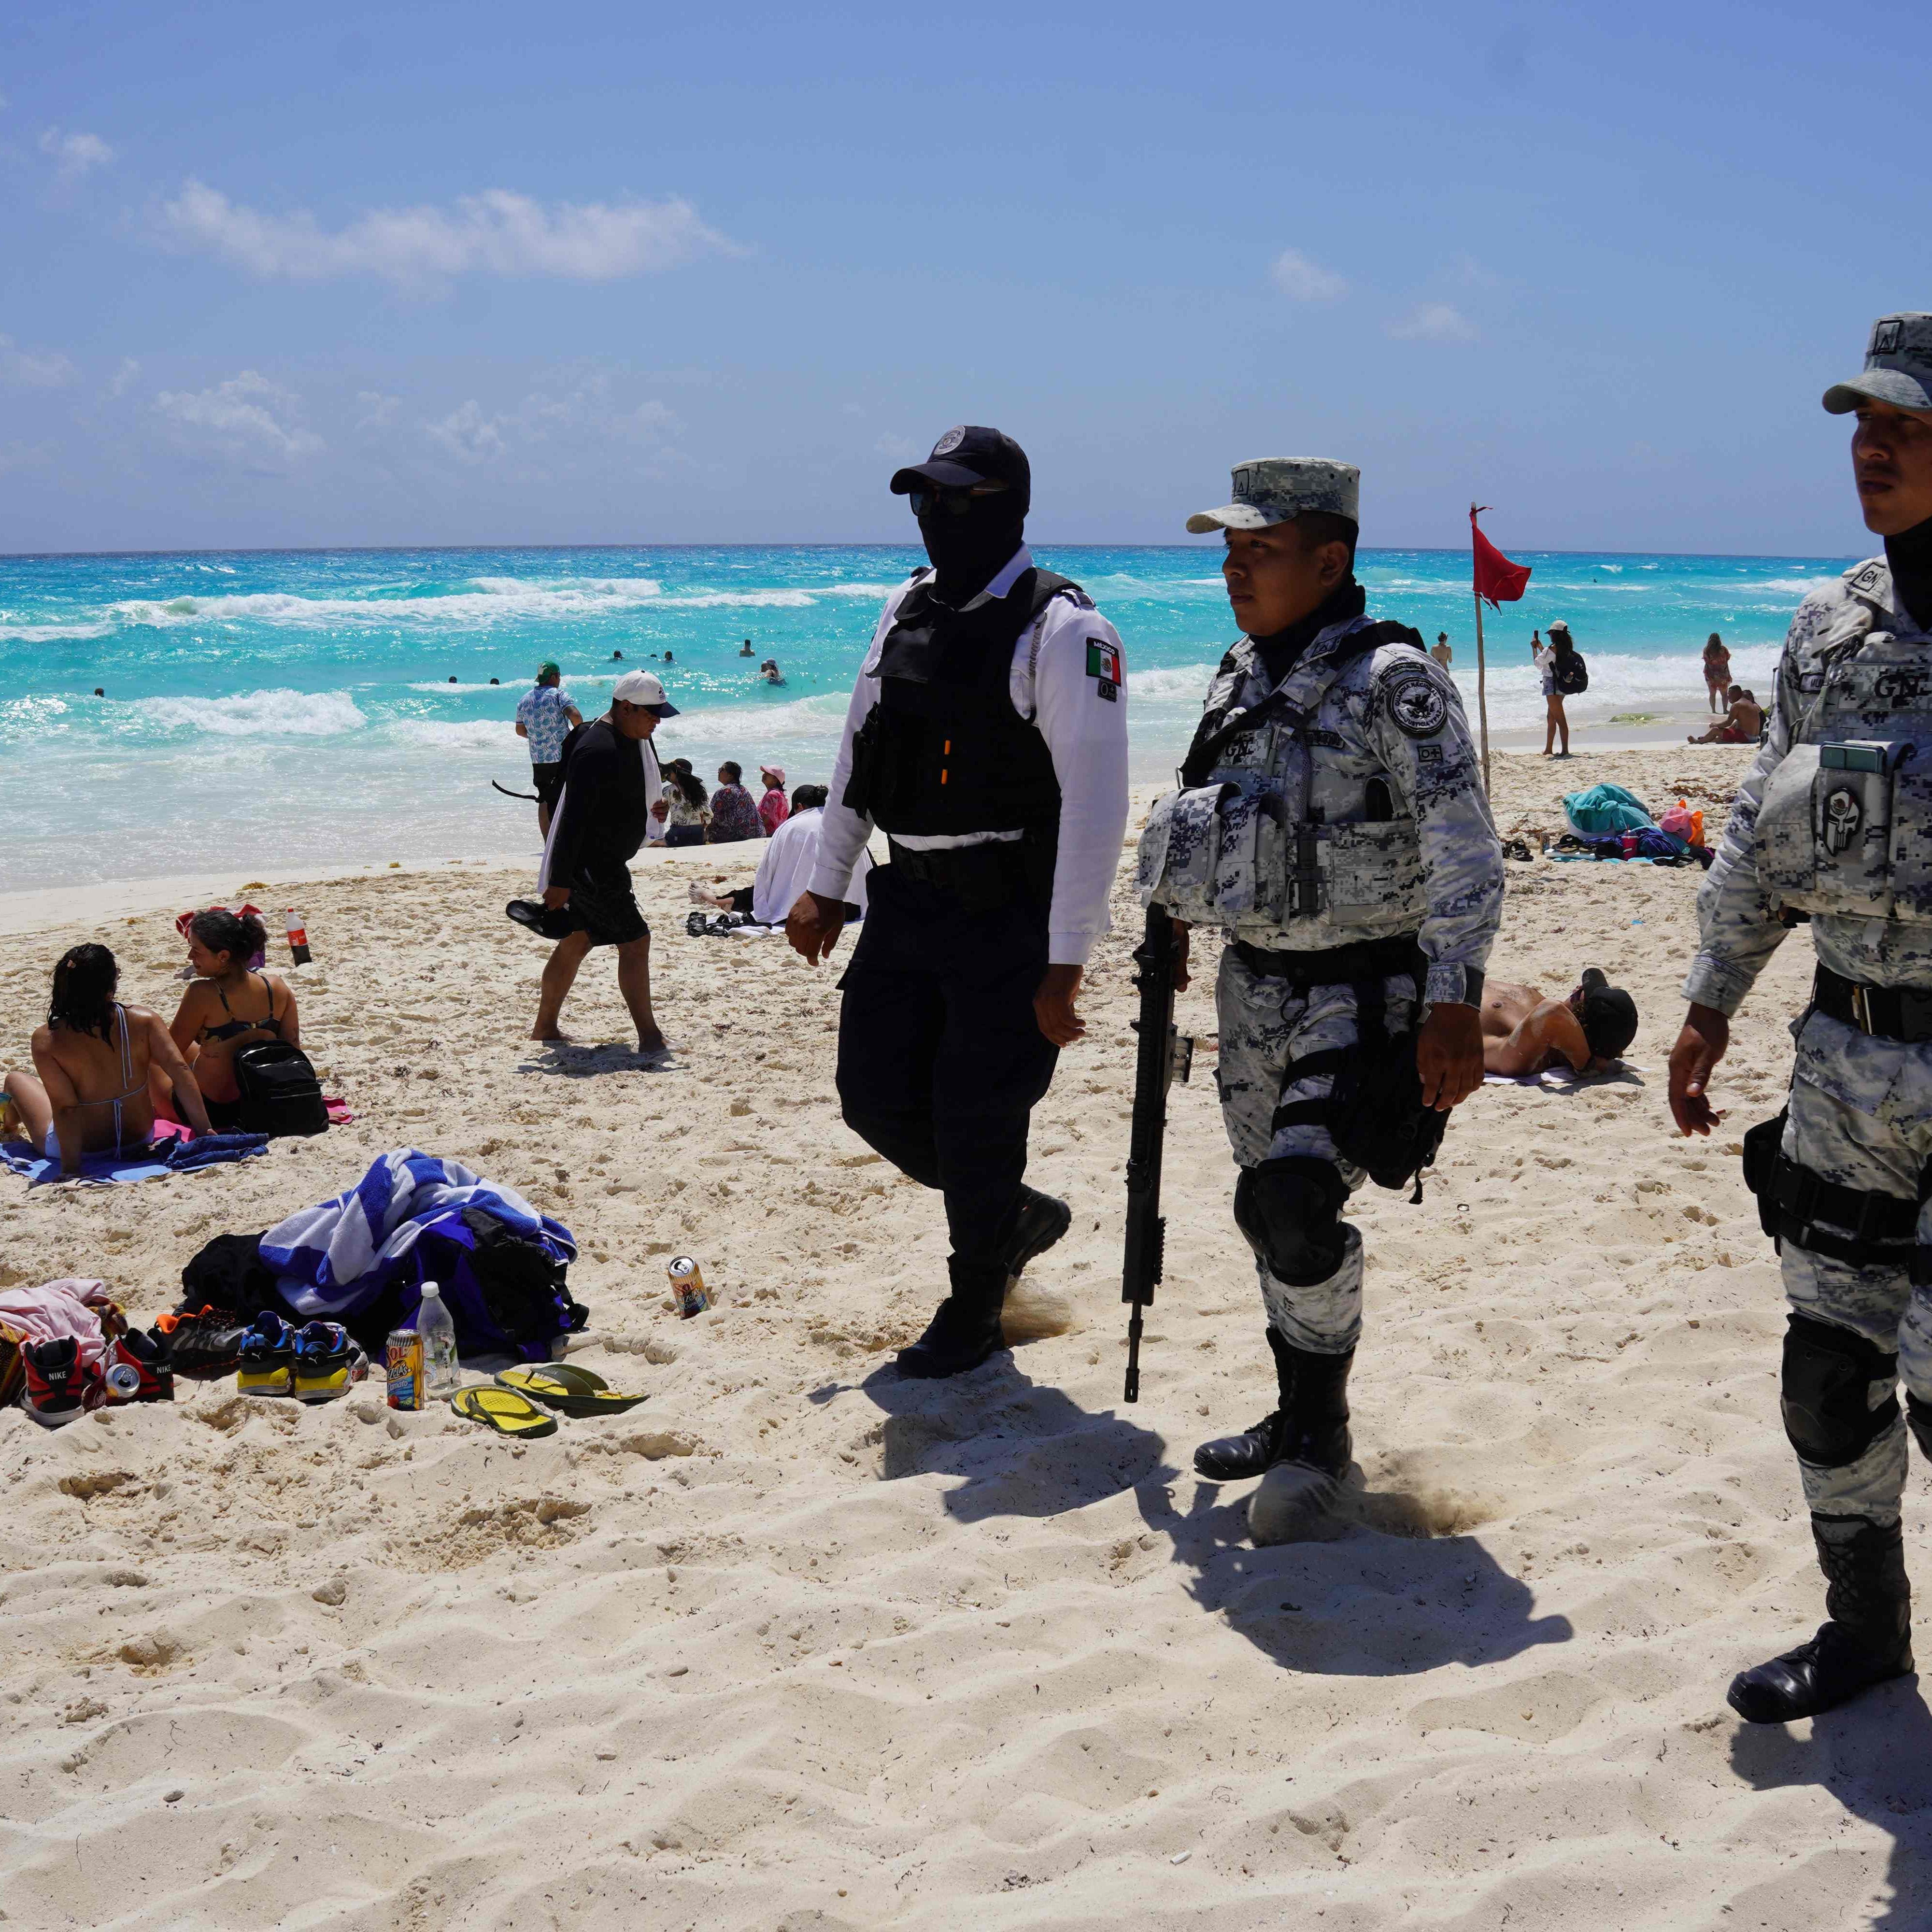 Members of the Mexican Navy and National Guard patrol the tourist beach area of Cancun, Quintana Roo state, Mexico in March 18, 2023. - US students on spring break, have flocked to the Mexican Caribbean despite warnings from Washington to travel to the country due to a wave of attacks on US citizens. In late April, the state's head prosecutor announced the discovery of 8 unidentified bodies in Cancun's resort area.